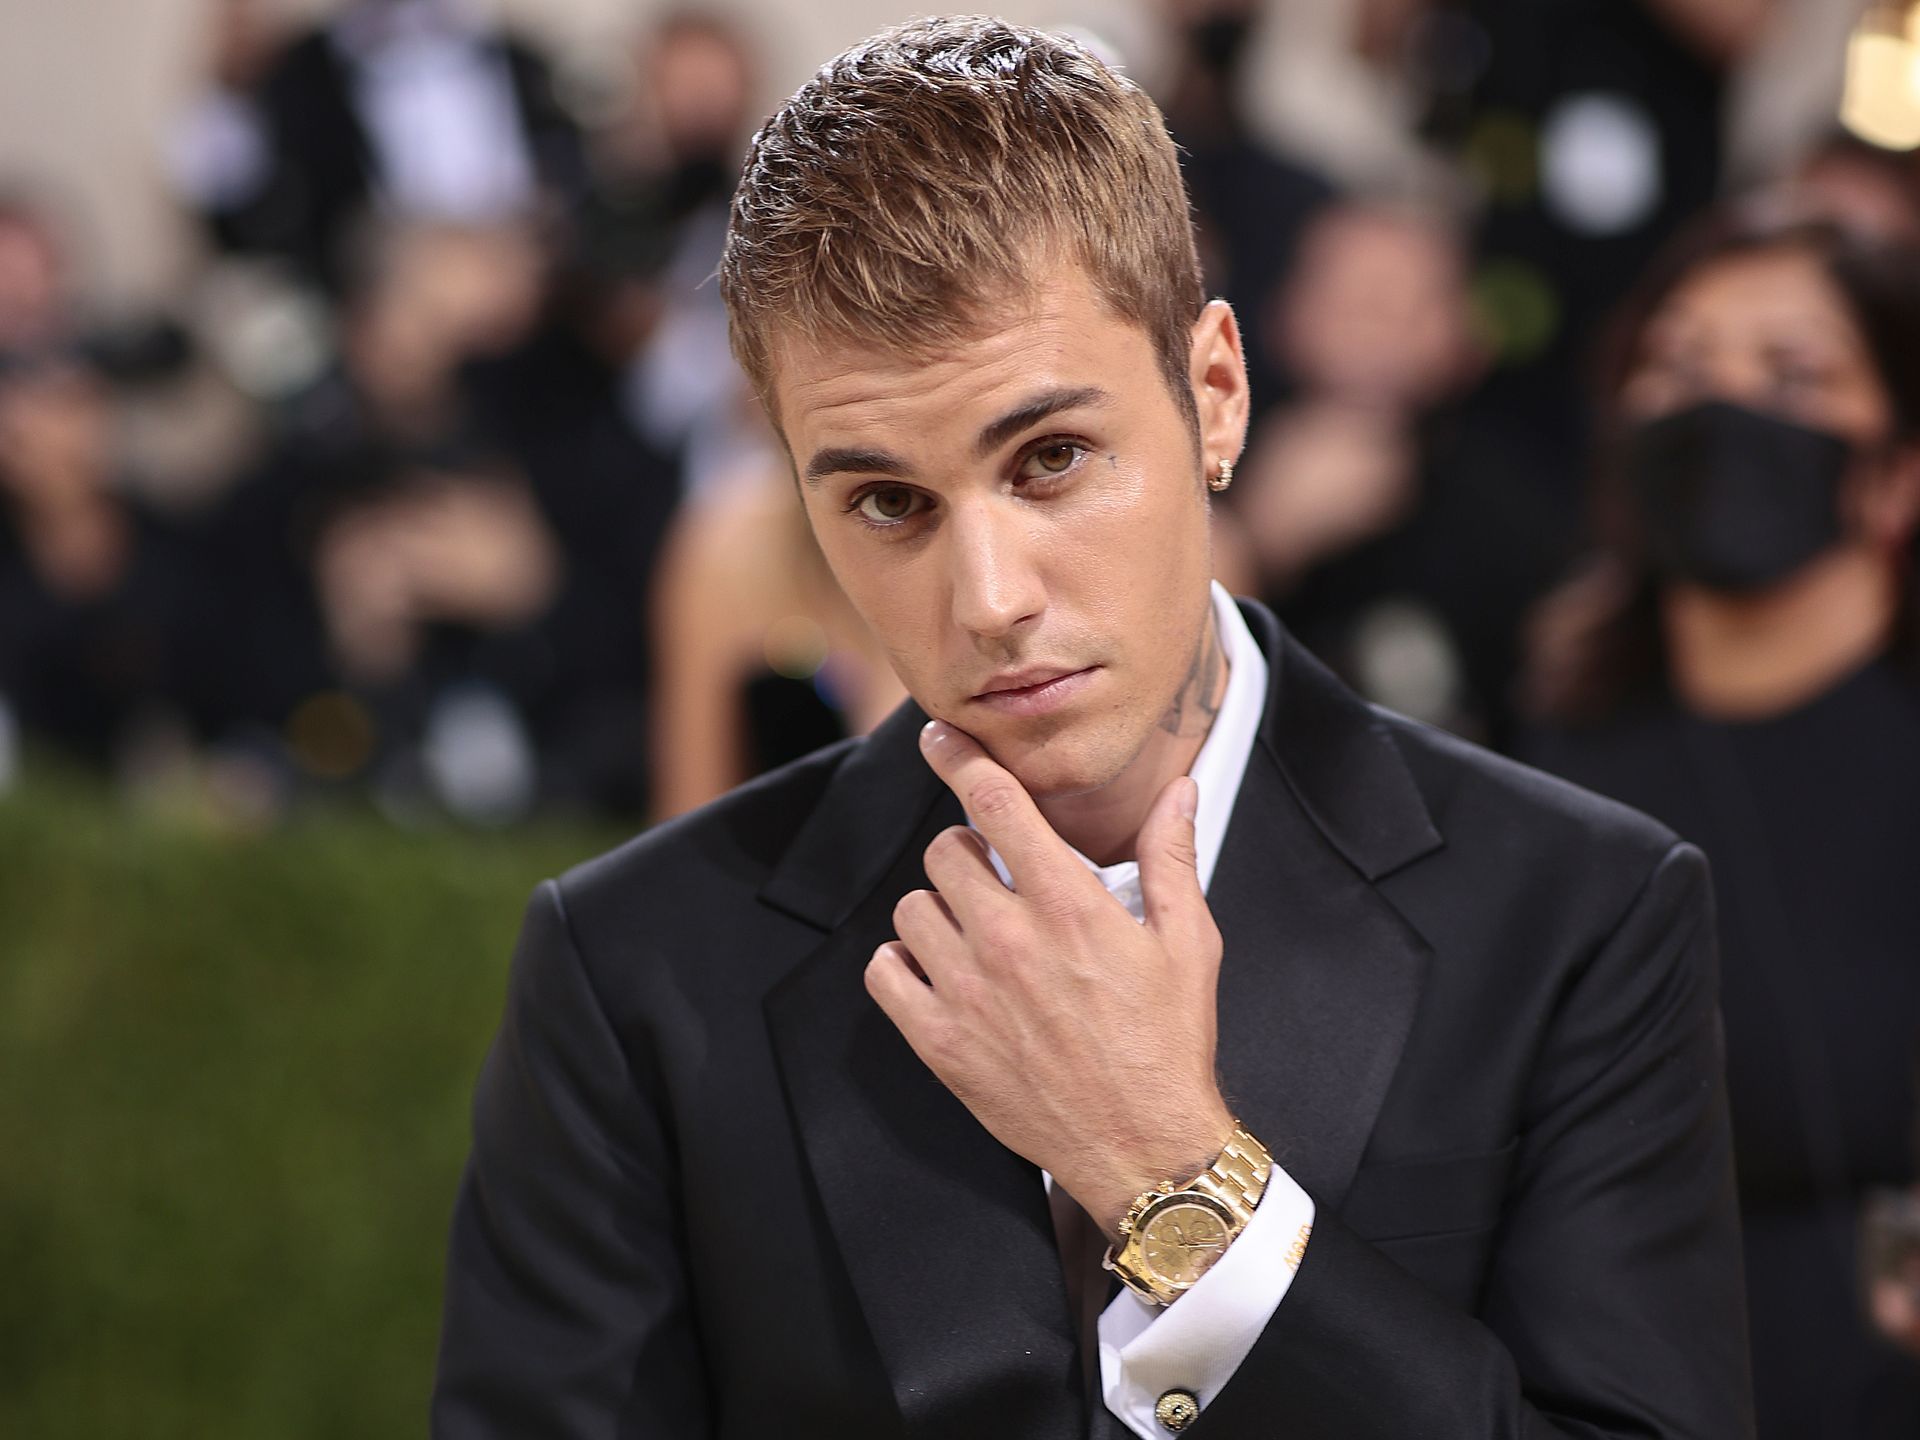 Justin Bieber denies rumors of split with longtime manager Scooter Braun